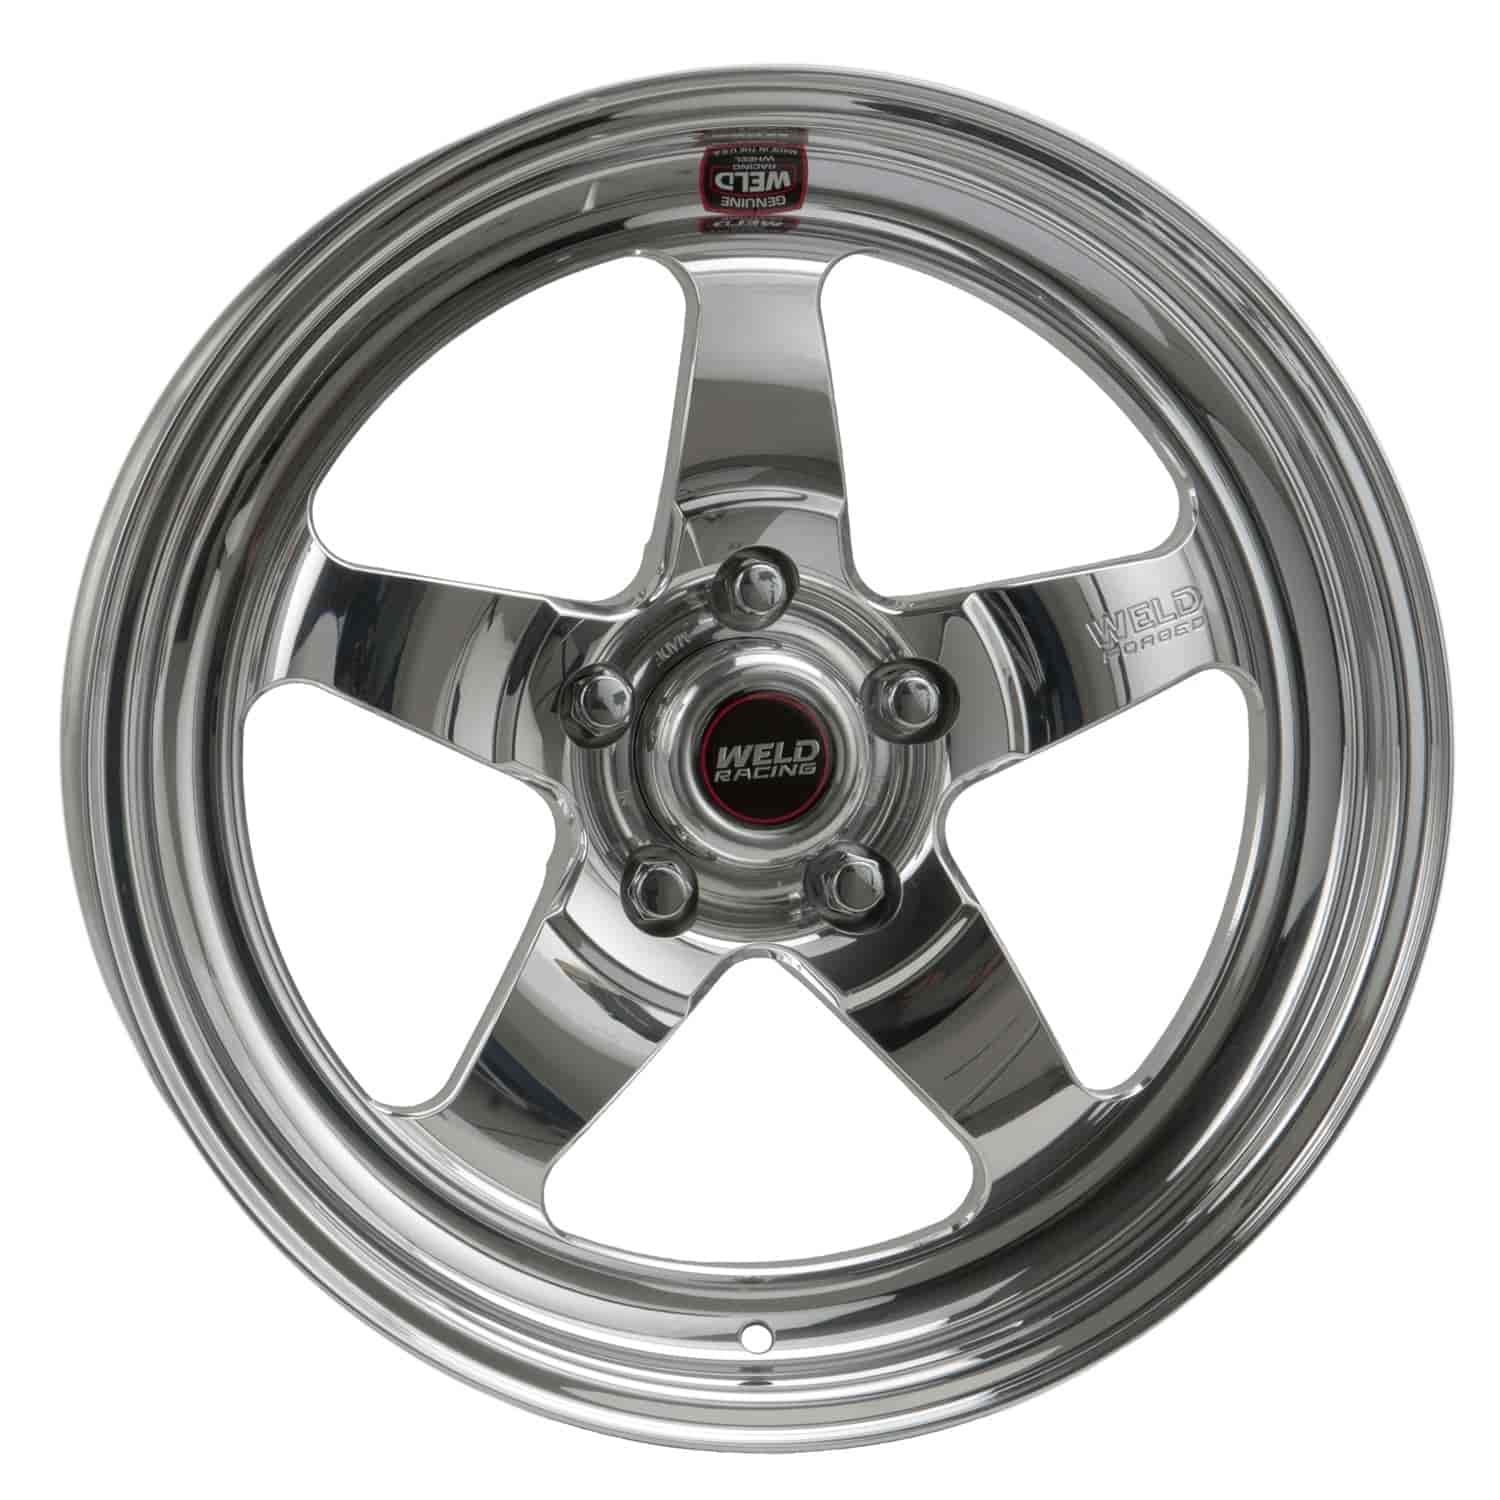 RT-S Series Wheel Size: 15" x 8" Bolt Circle: 5 x 4-1/2" Rear Spacing: 5-1/2" Offset: +21.91mm